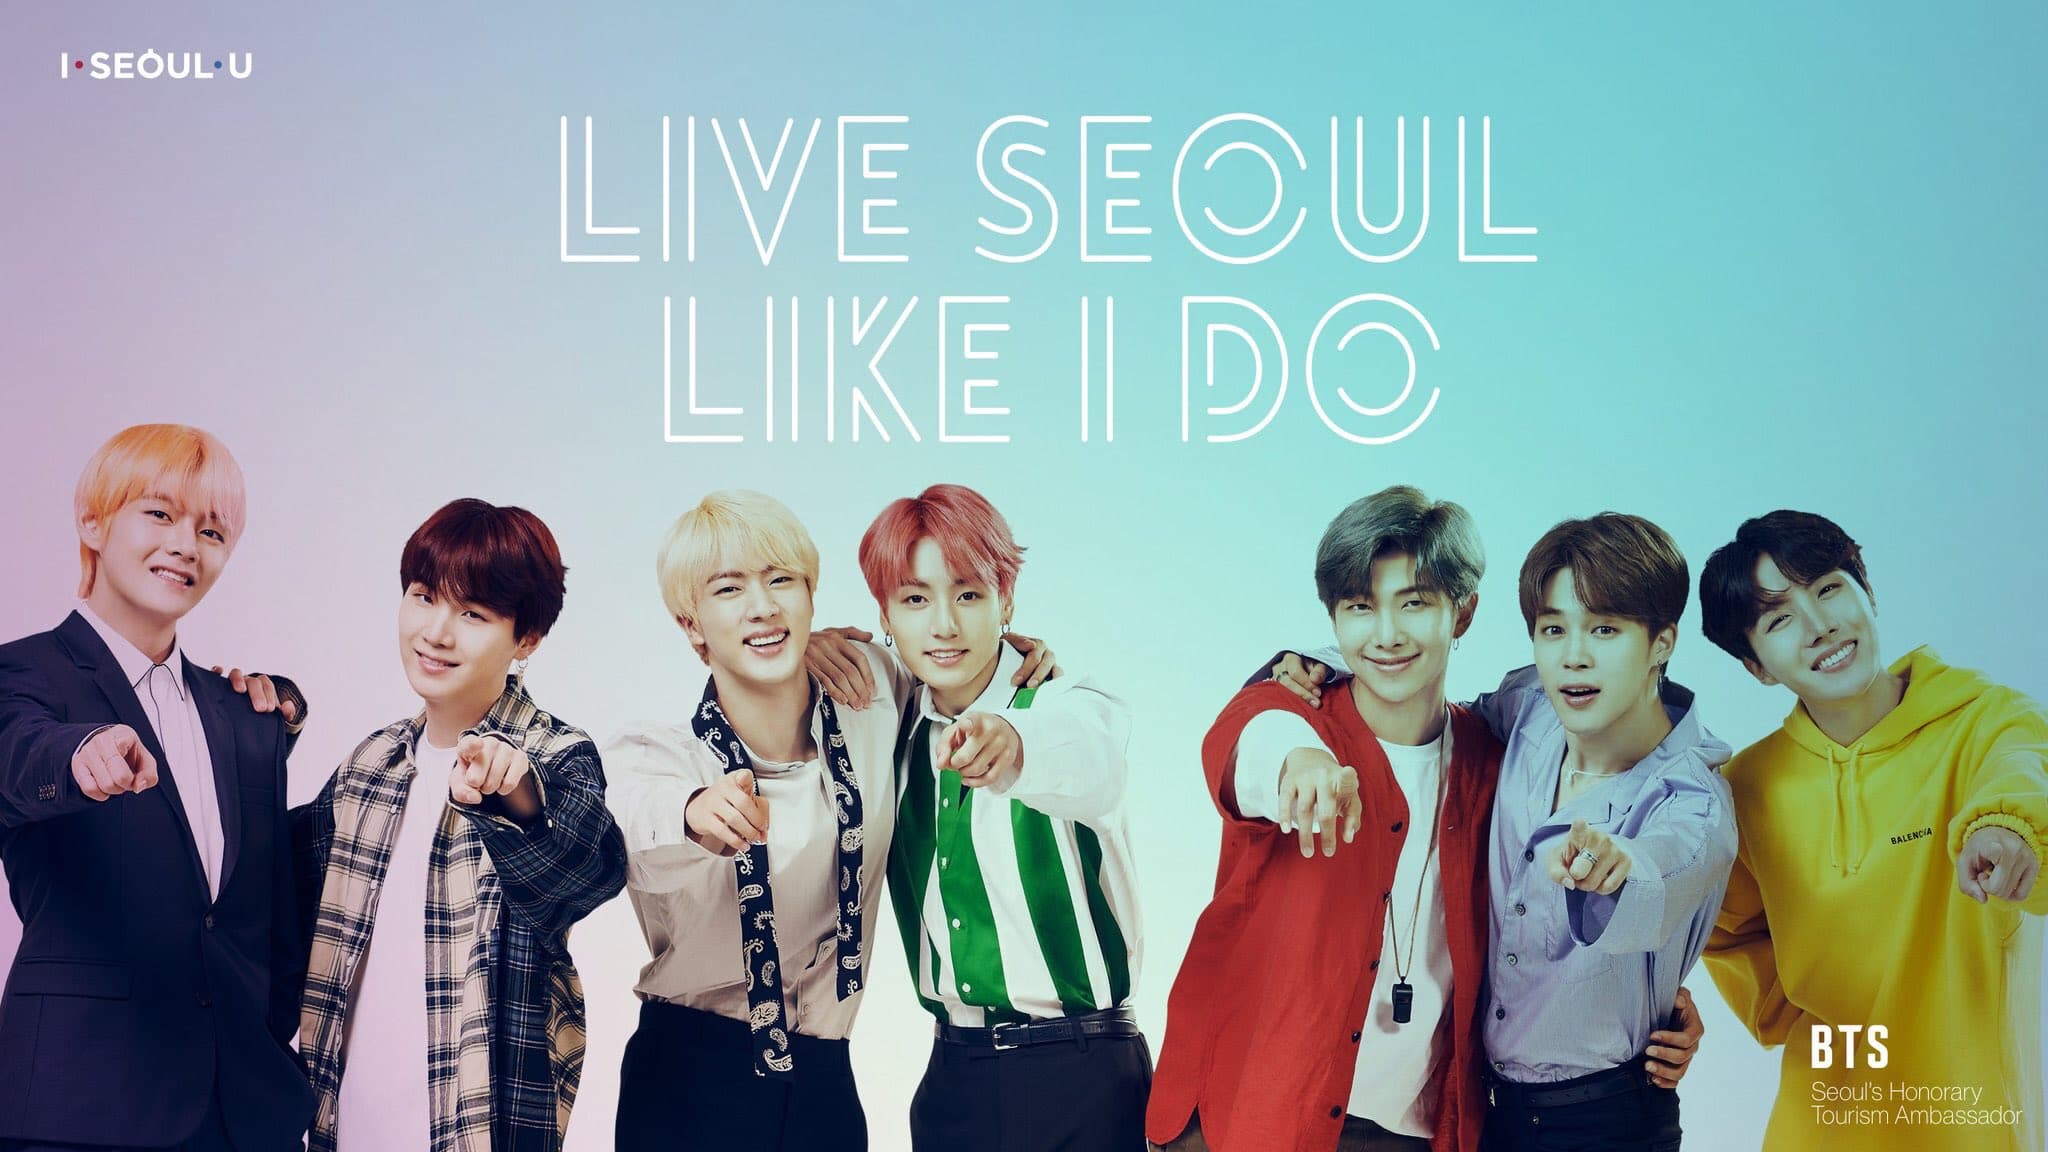 BTS Encourages You To Live Seoul Like They Do In New Seoul Tour